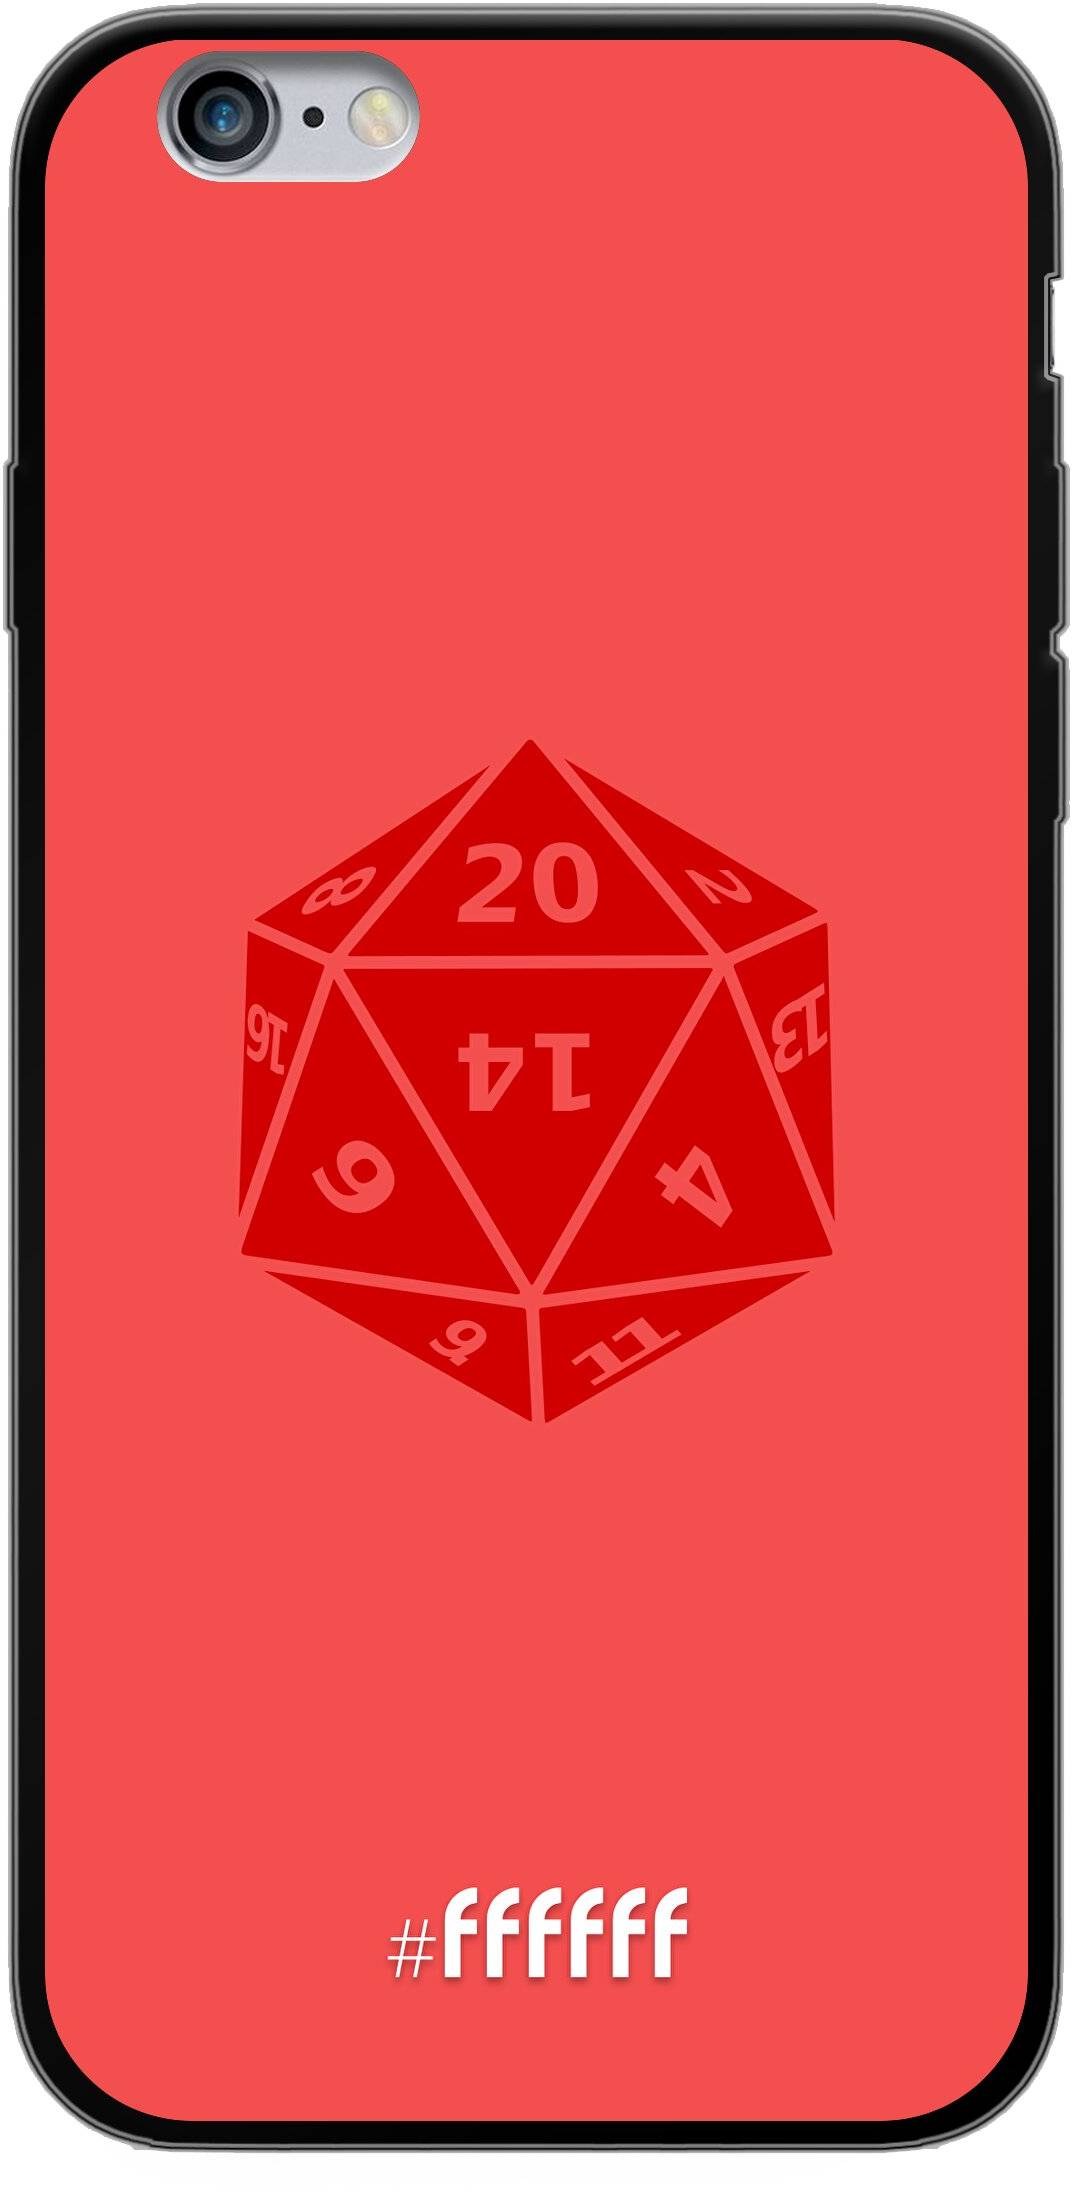 D20 - Red iPhone 6s